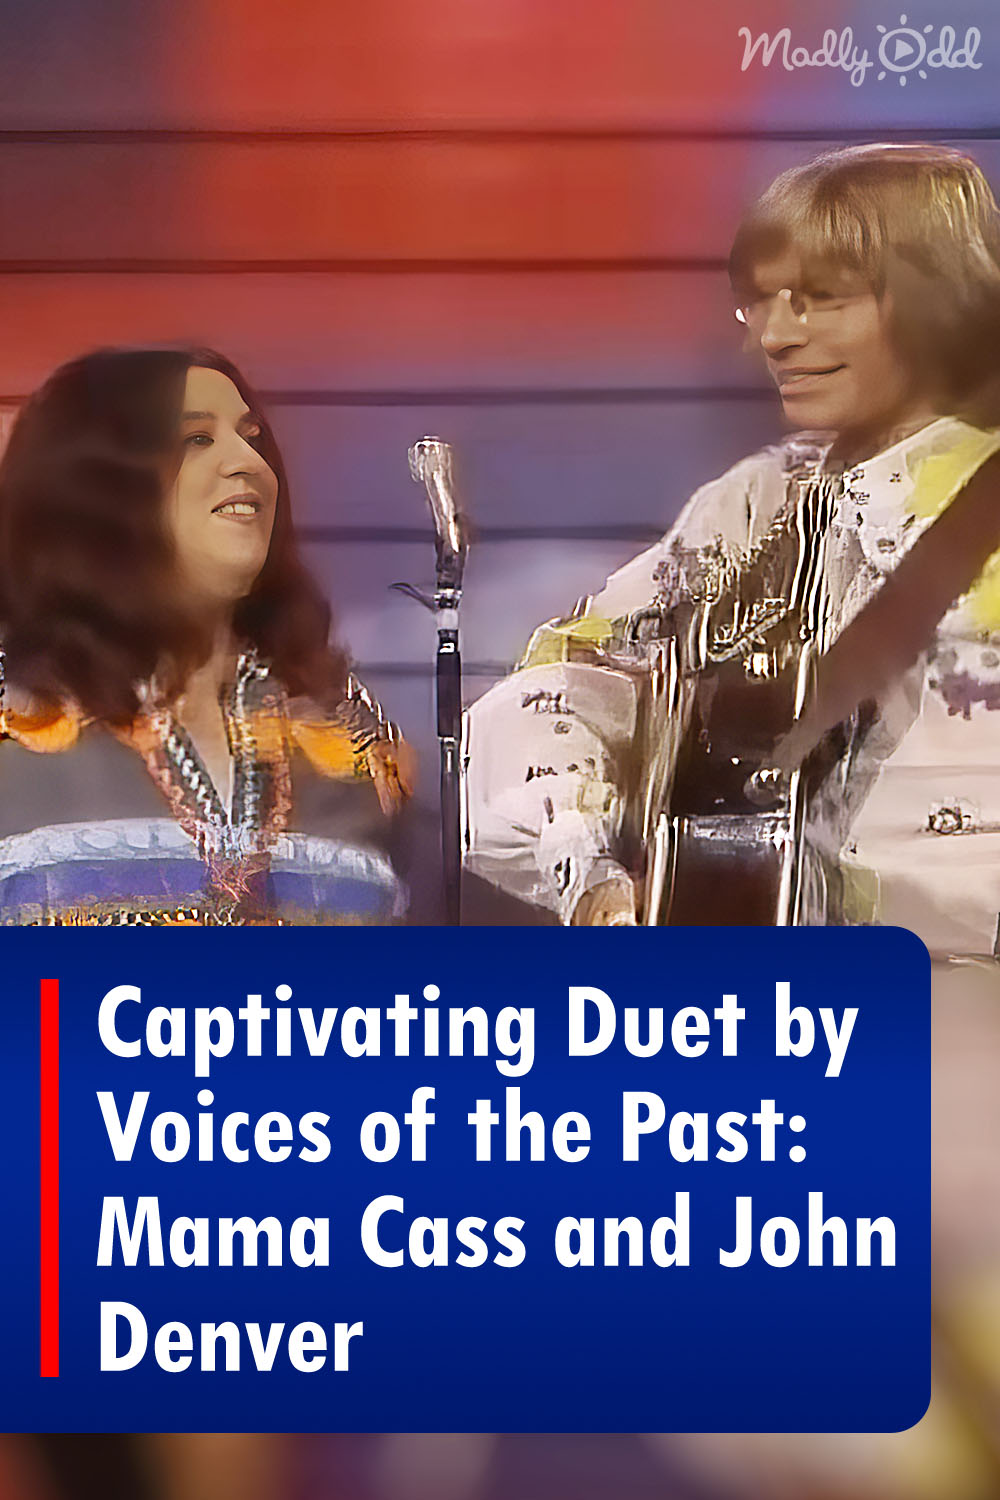 Captivating Duet by Voices of the Past: Mama Cass and John Denver